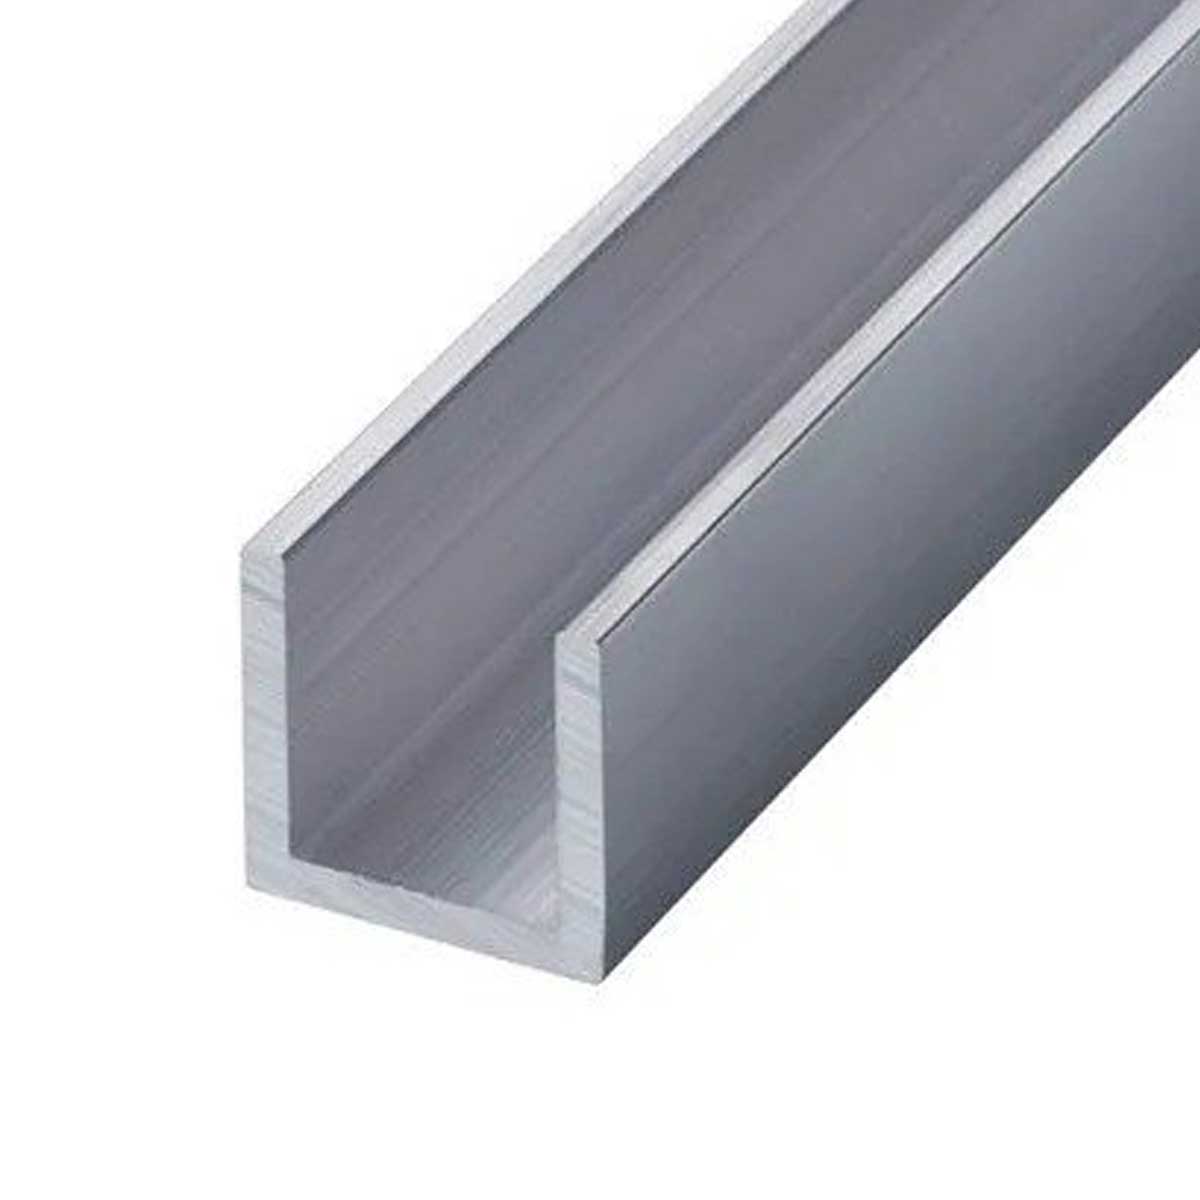 Aluminium C Channel For Construction Manufacturers, Suppliers in Purulia